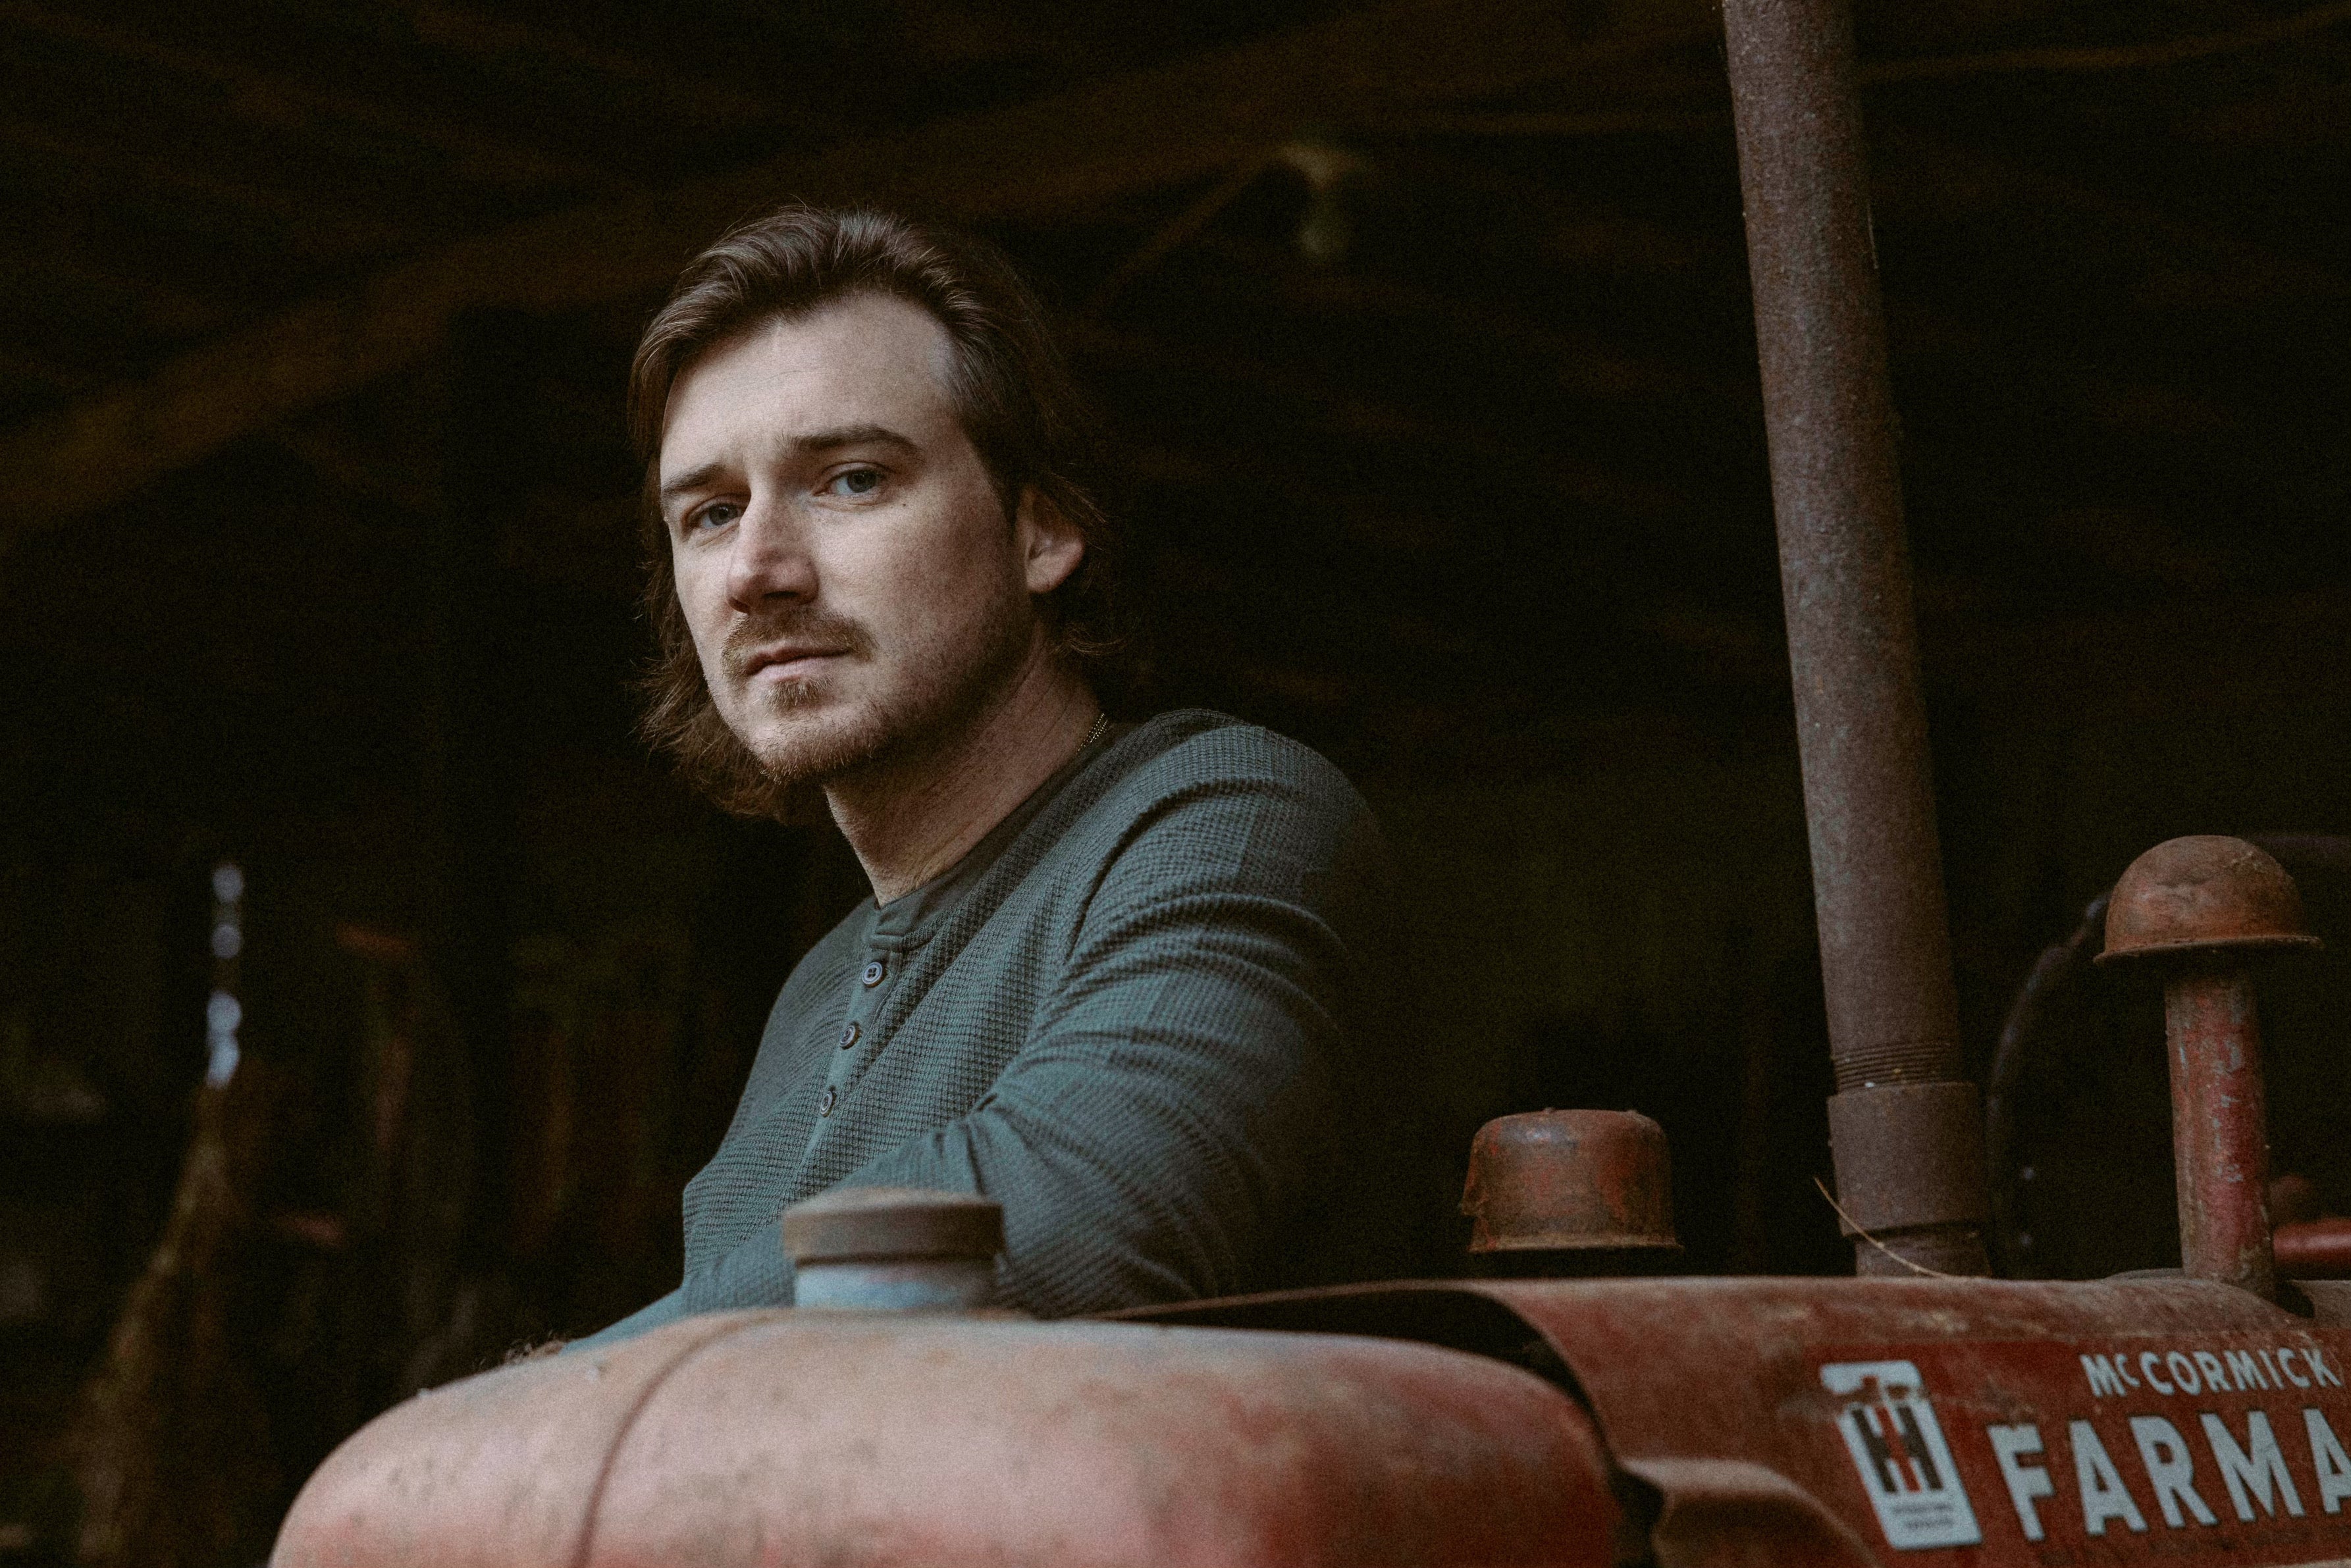 Morgan Wallen - One Night At a Time Tour presale passcode for advance tickets in London